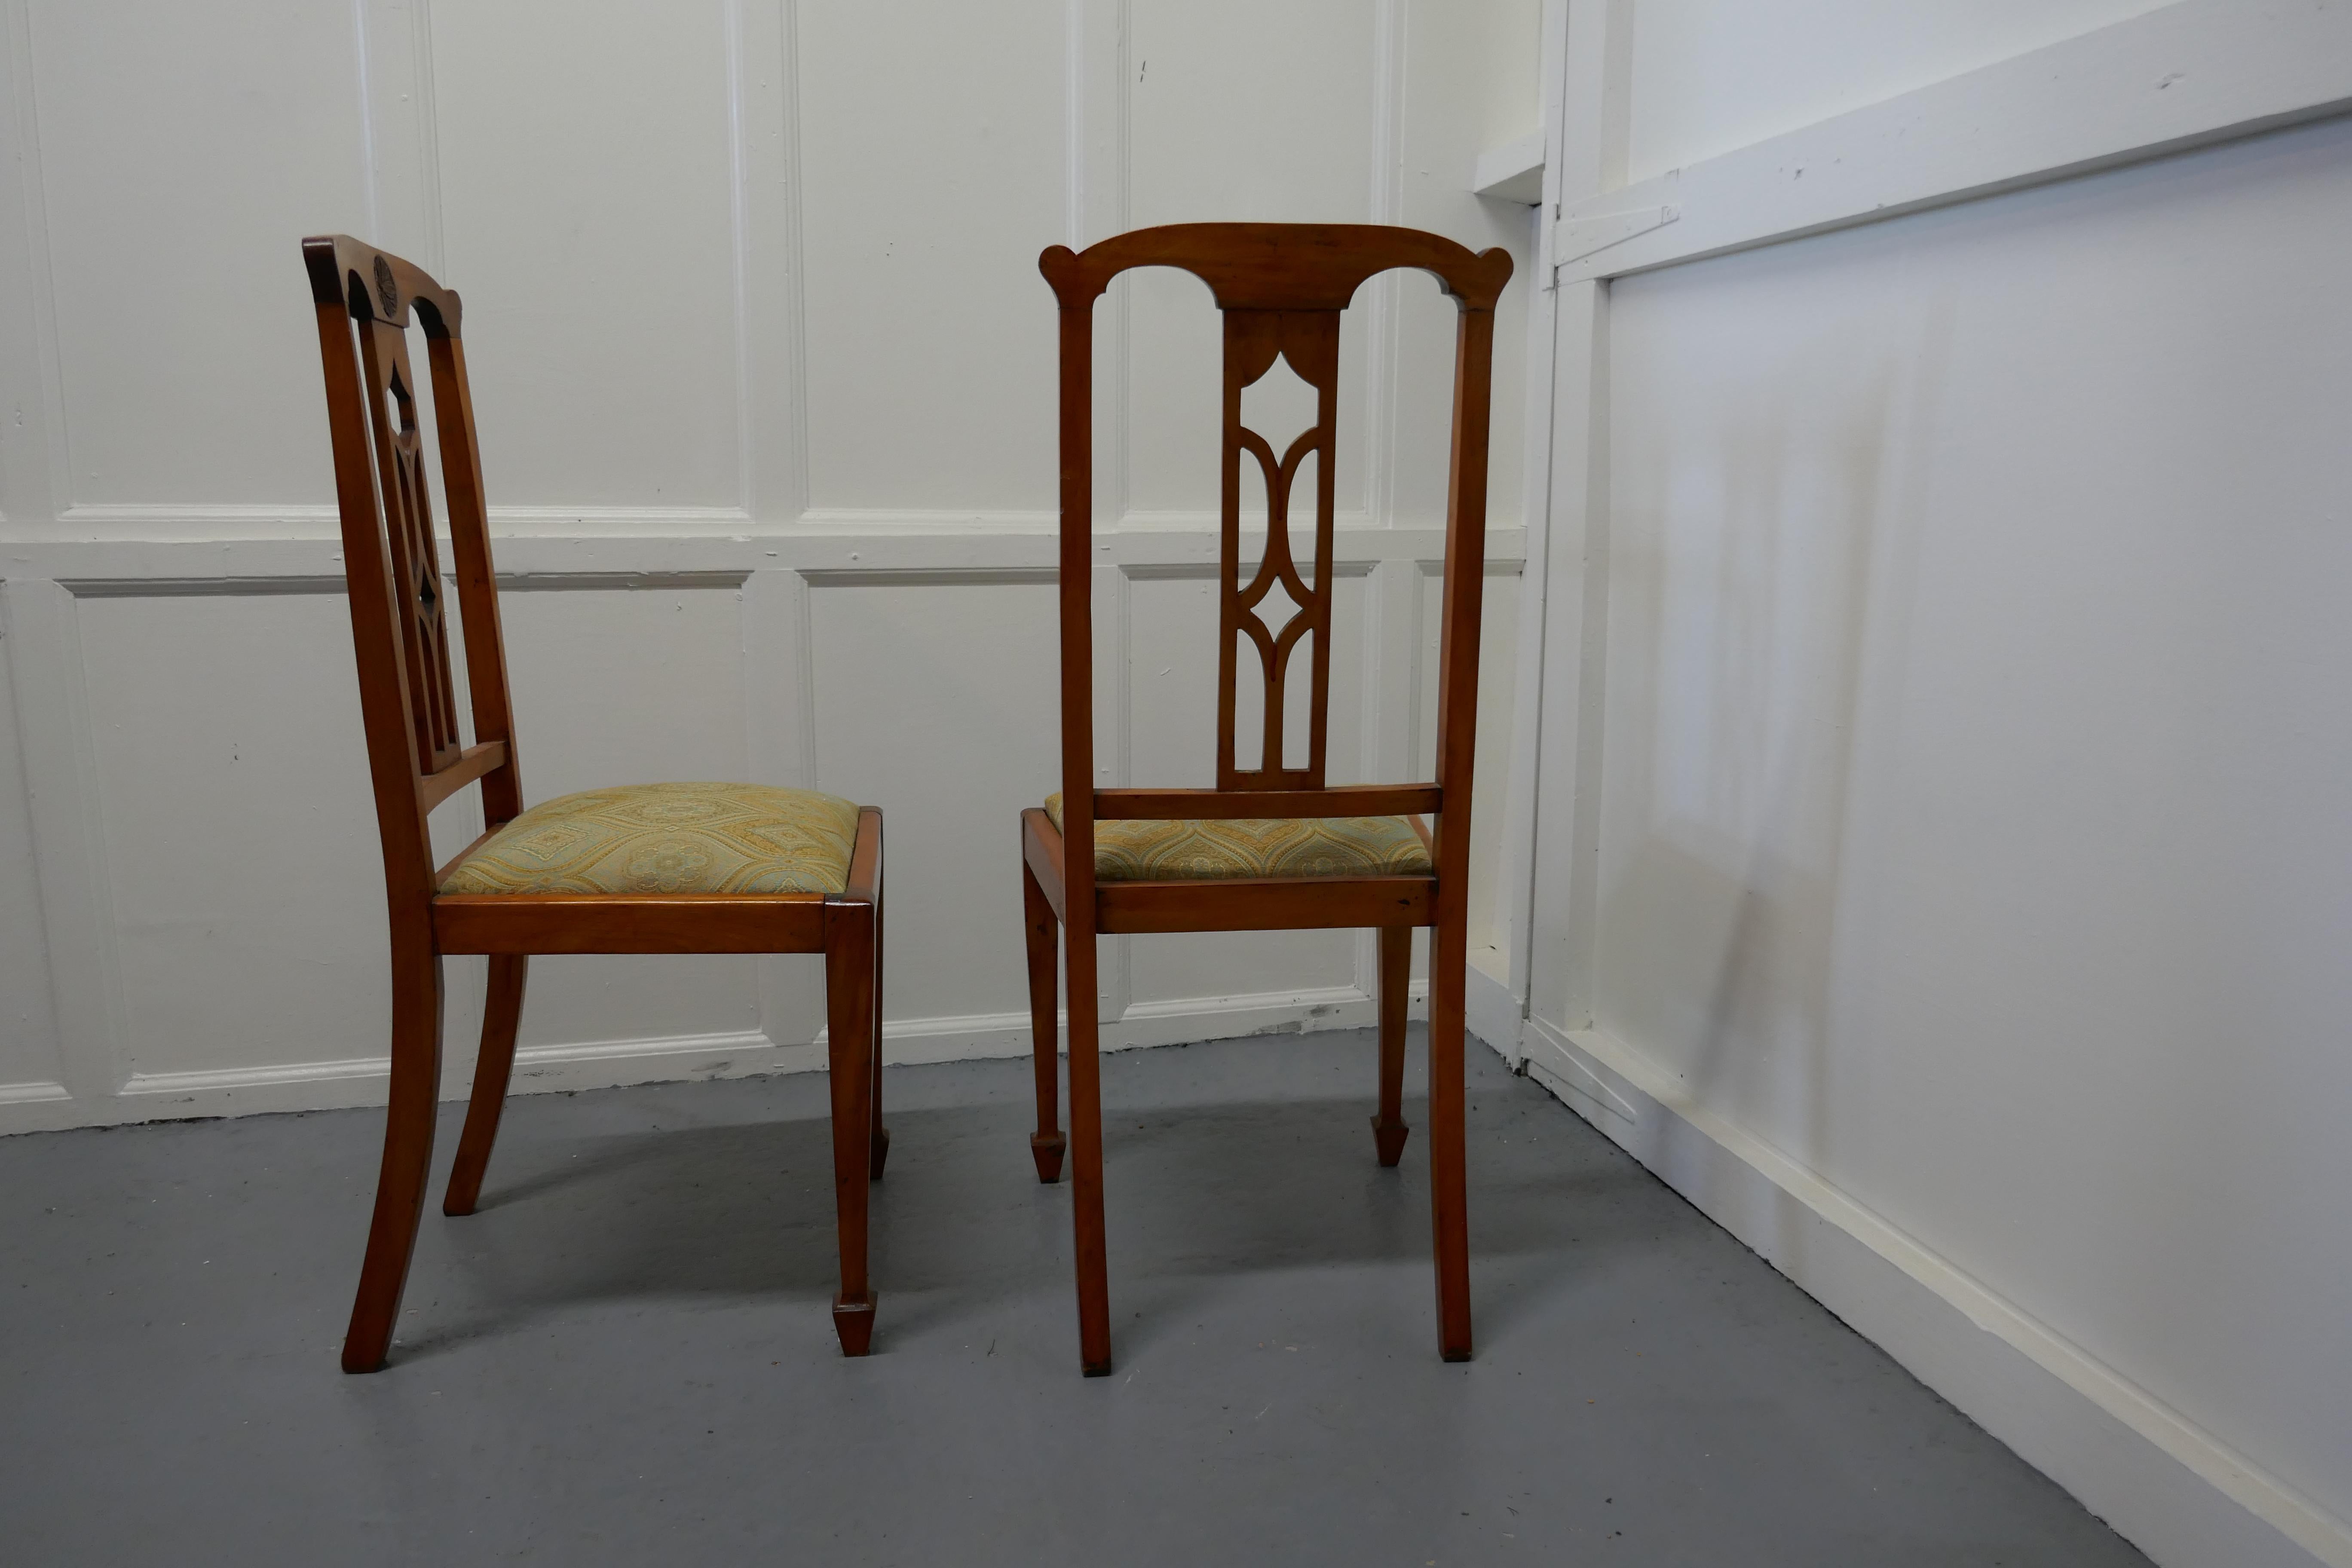 Pair of Arts & Crafts Golden Oak Chairs 1